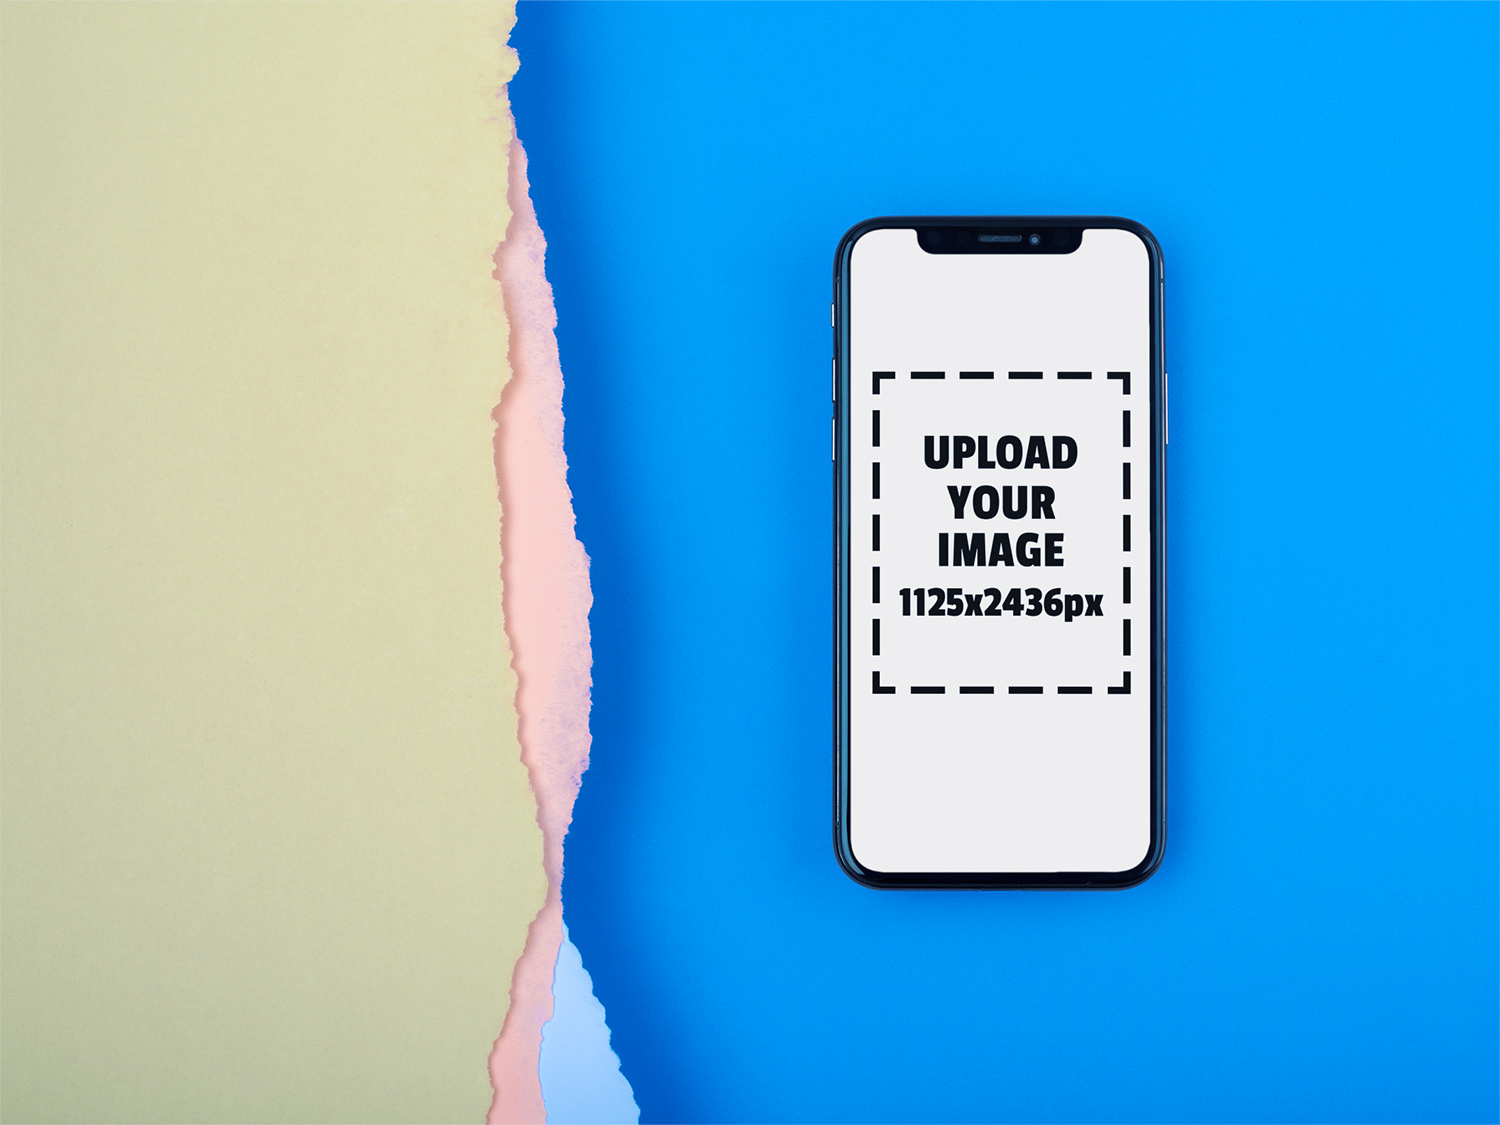 iphone-x-mockup-lying-on-a-blue-surface-near-broken-paper-a20011